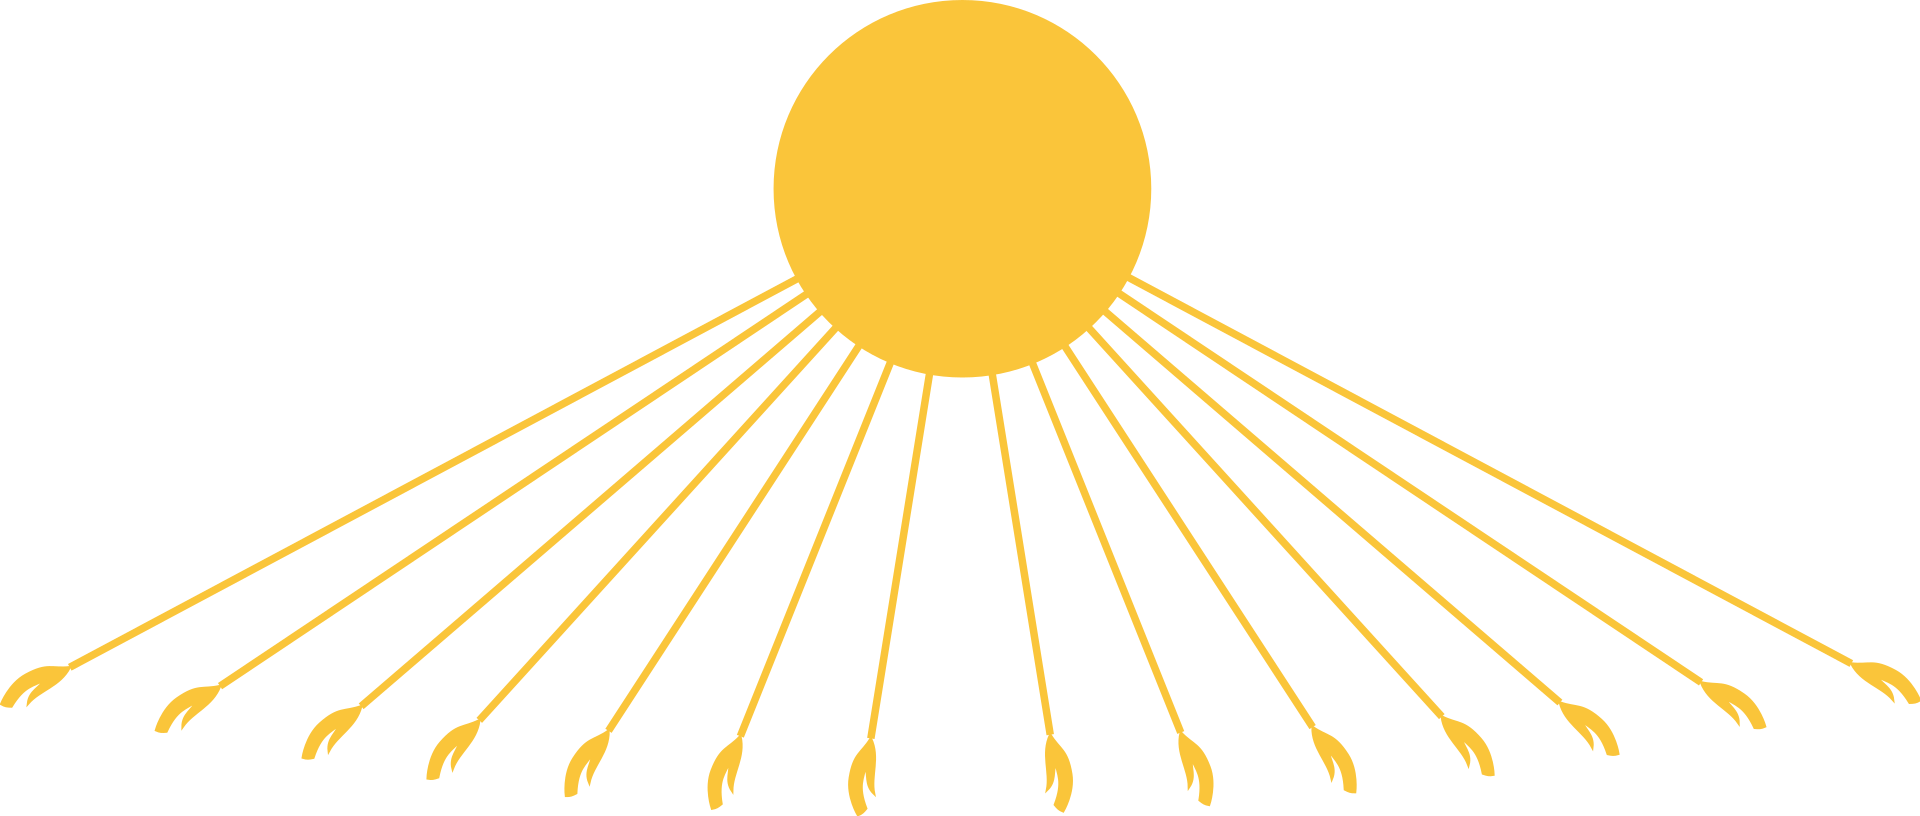 The symbol of Aten - Sun disc and radiating arms